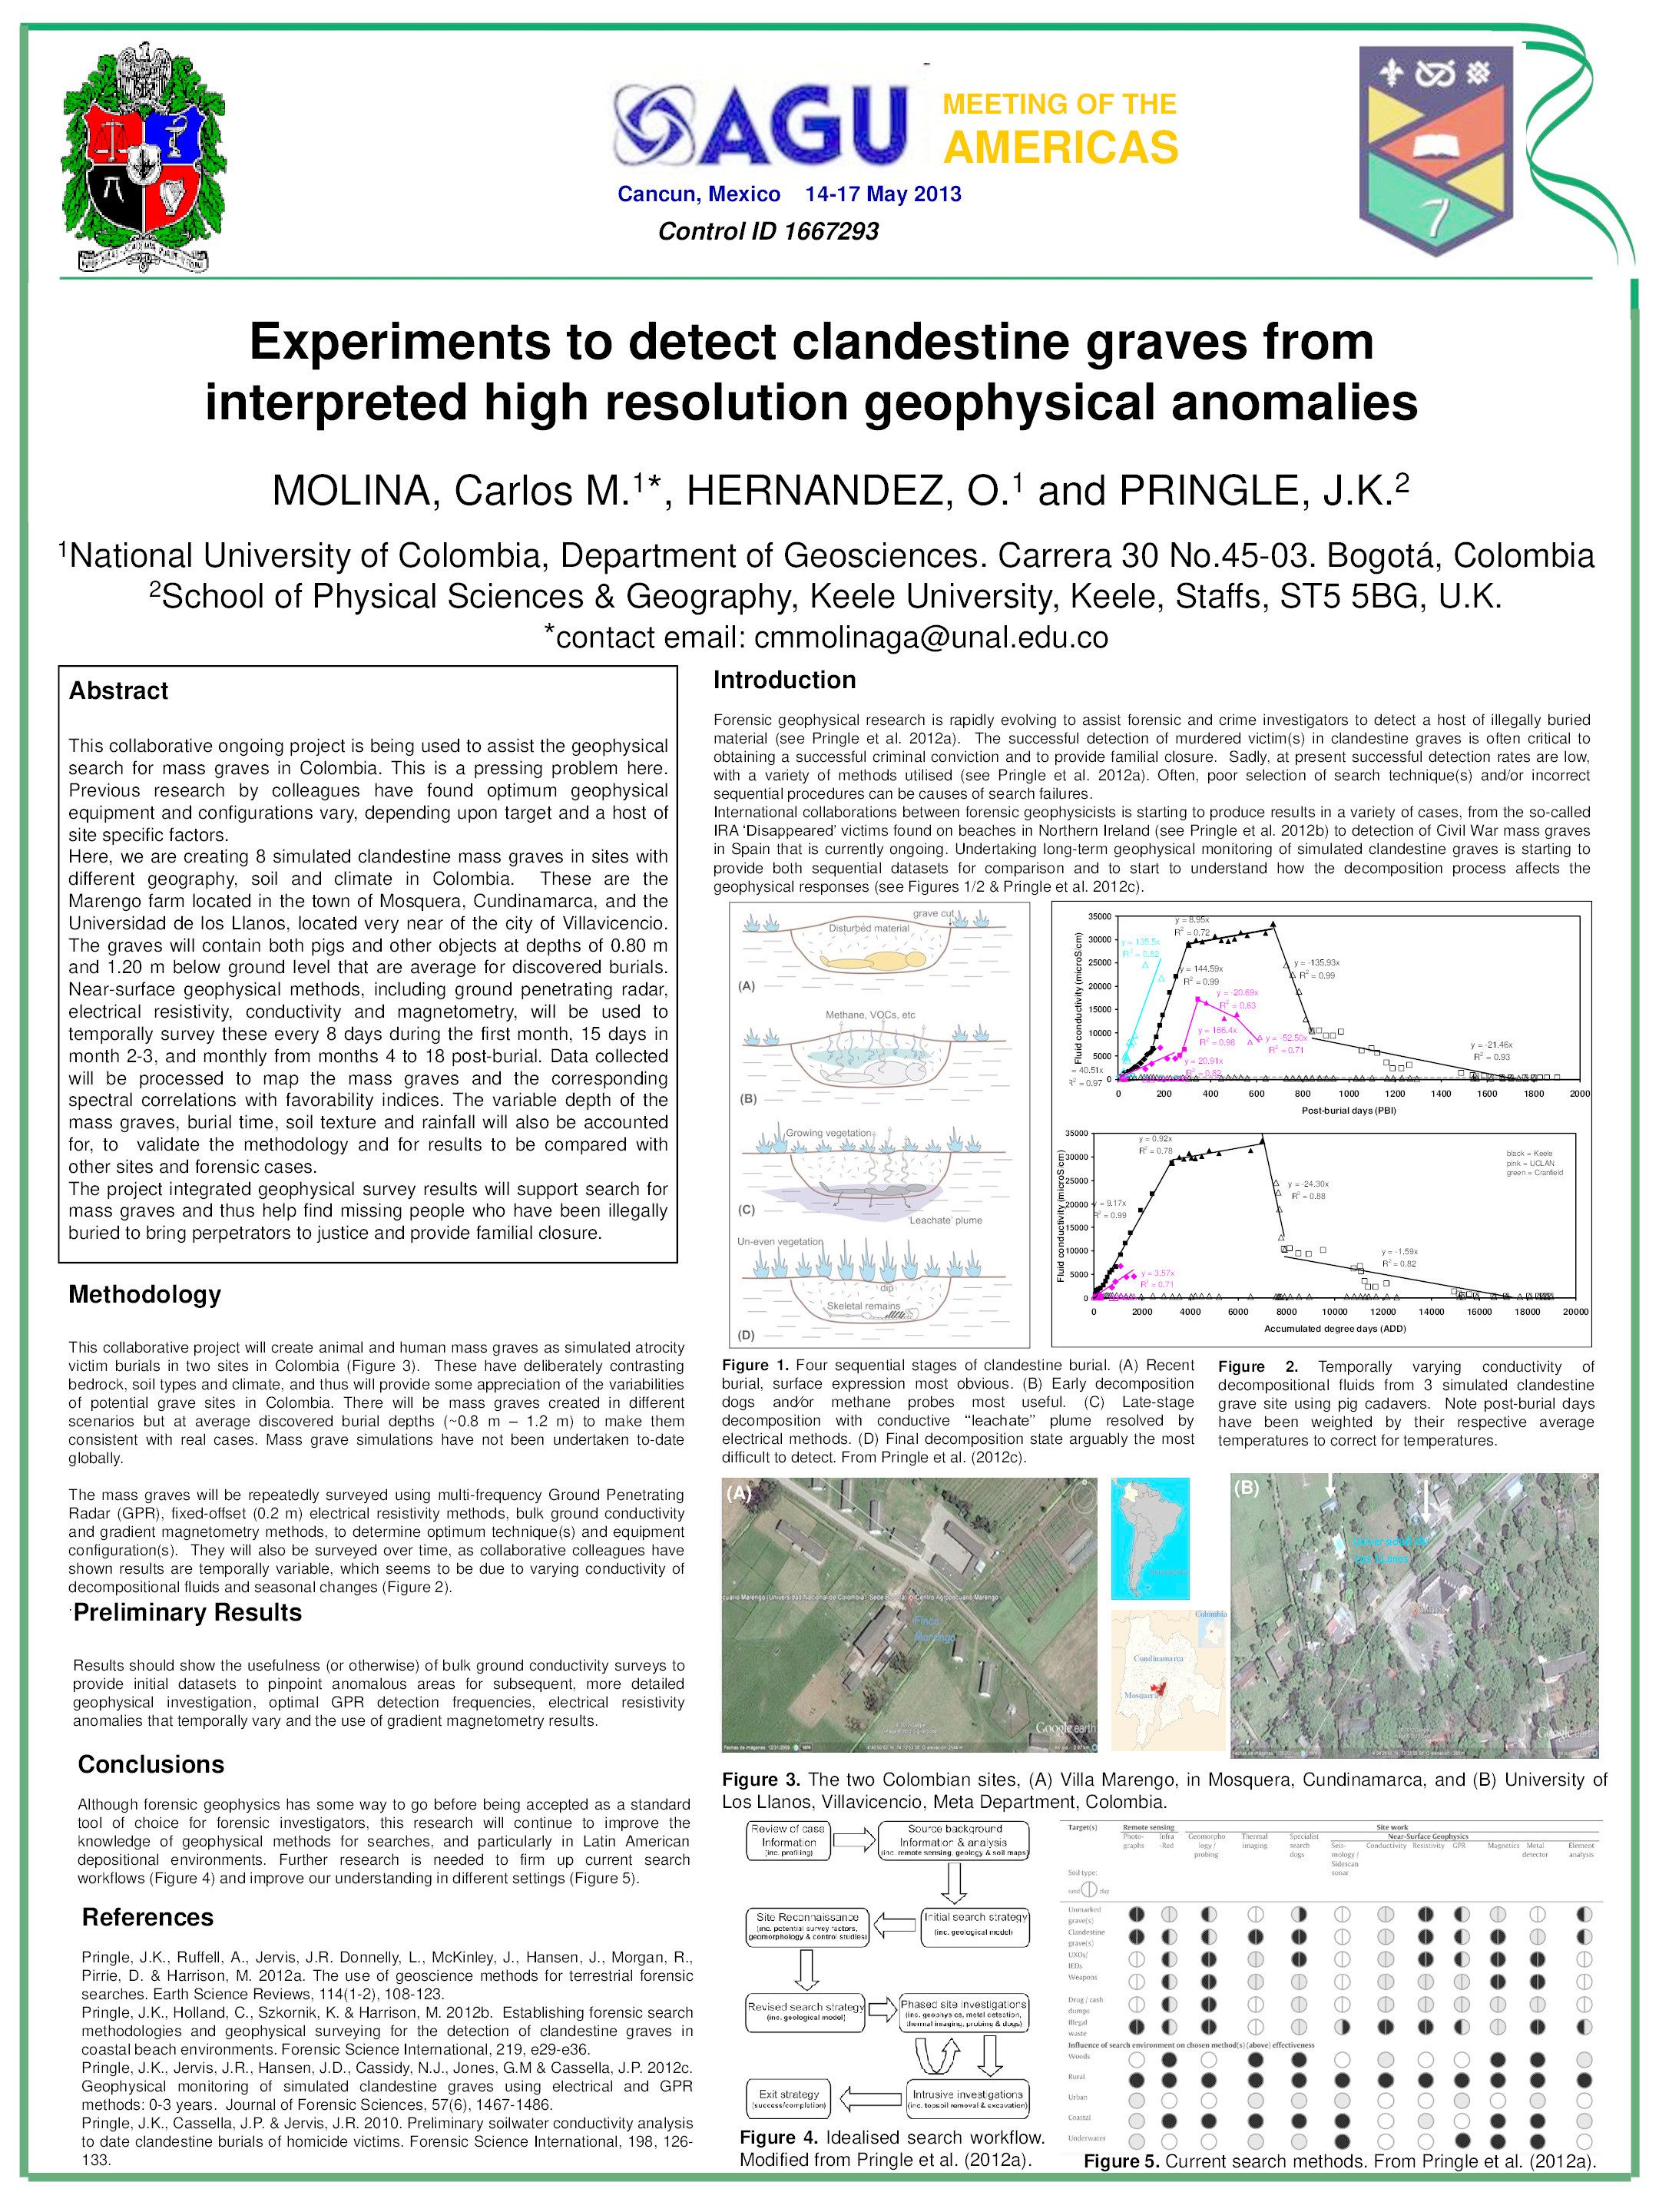 Experiments to detect clandestine graves in Colombia using near-surface geophysical methods Thumbnail